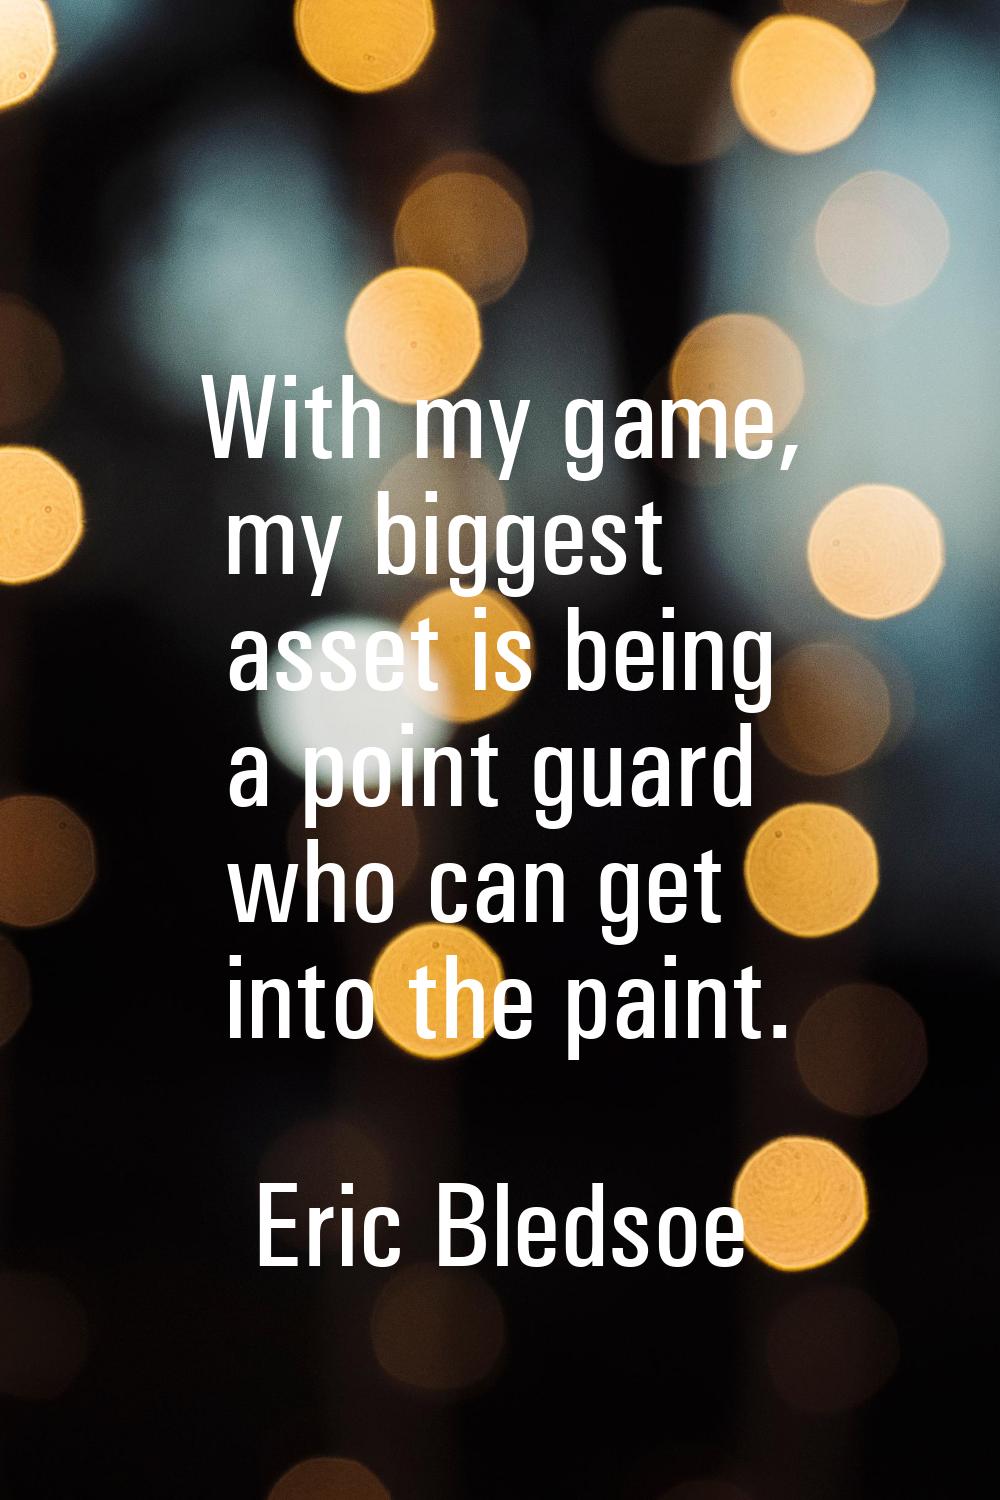 With my game, my biggest asset is being a point guard who can get into the paint.